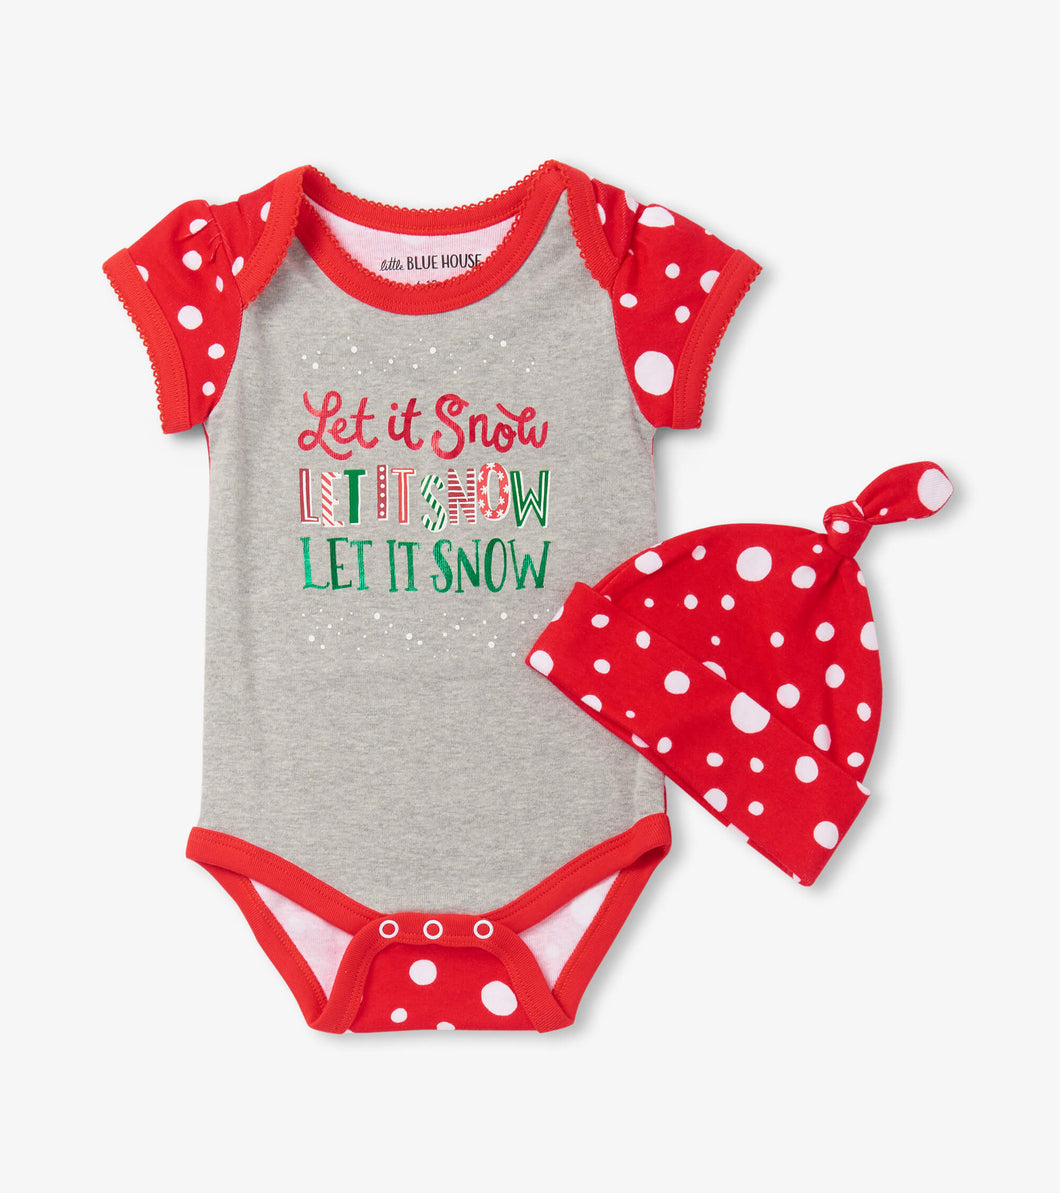 Little Blue House by Hatley Baby Let it Snow Onesie & Hat